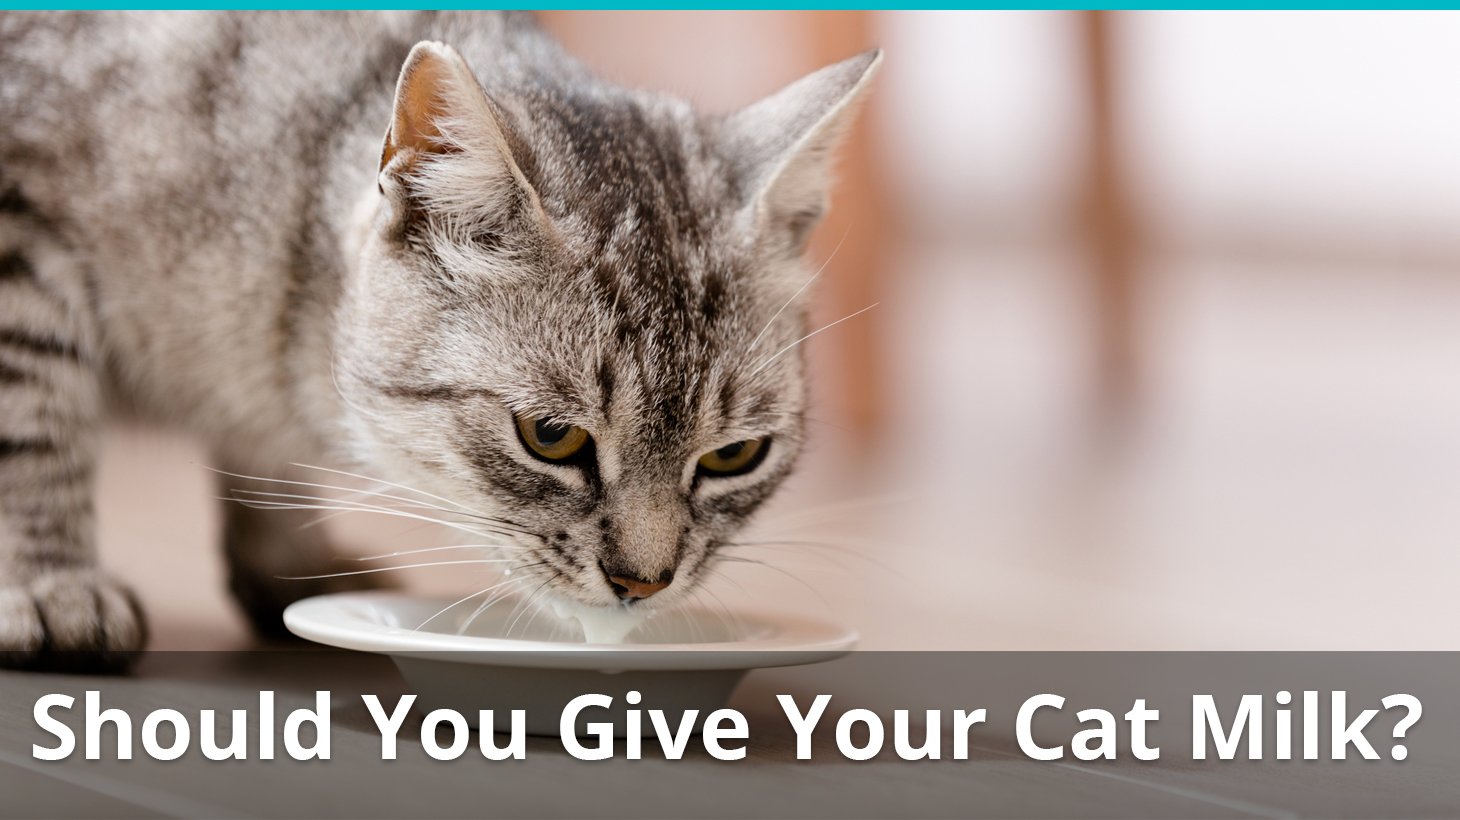 Is Milk Bad For Cats? Are They Lactose Intolerant? Is It Good For Kittens?